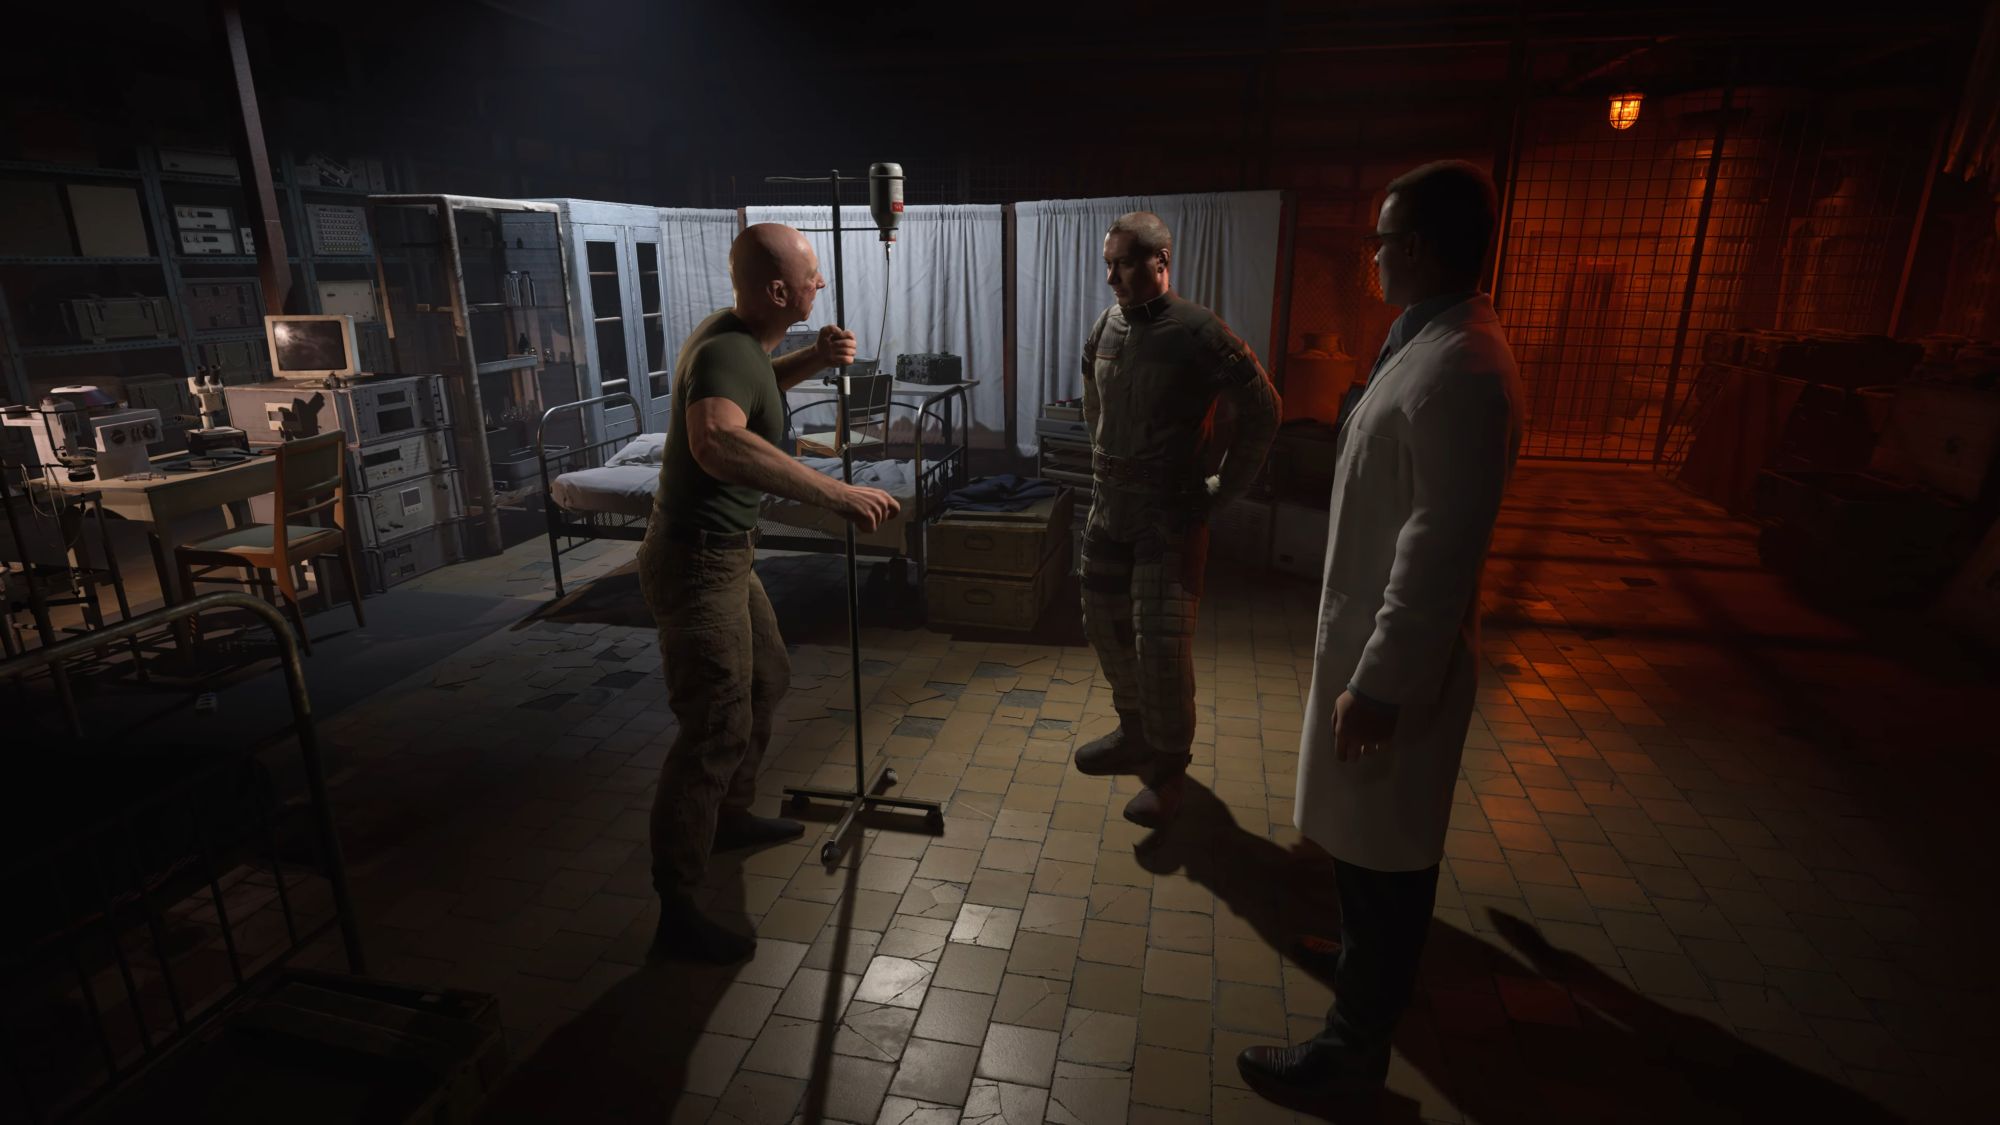 STALKER 2: Heart of Chernobyl receives its first gameplay trailer